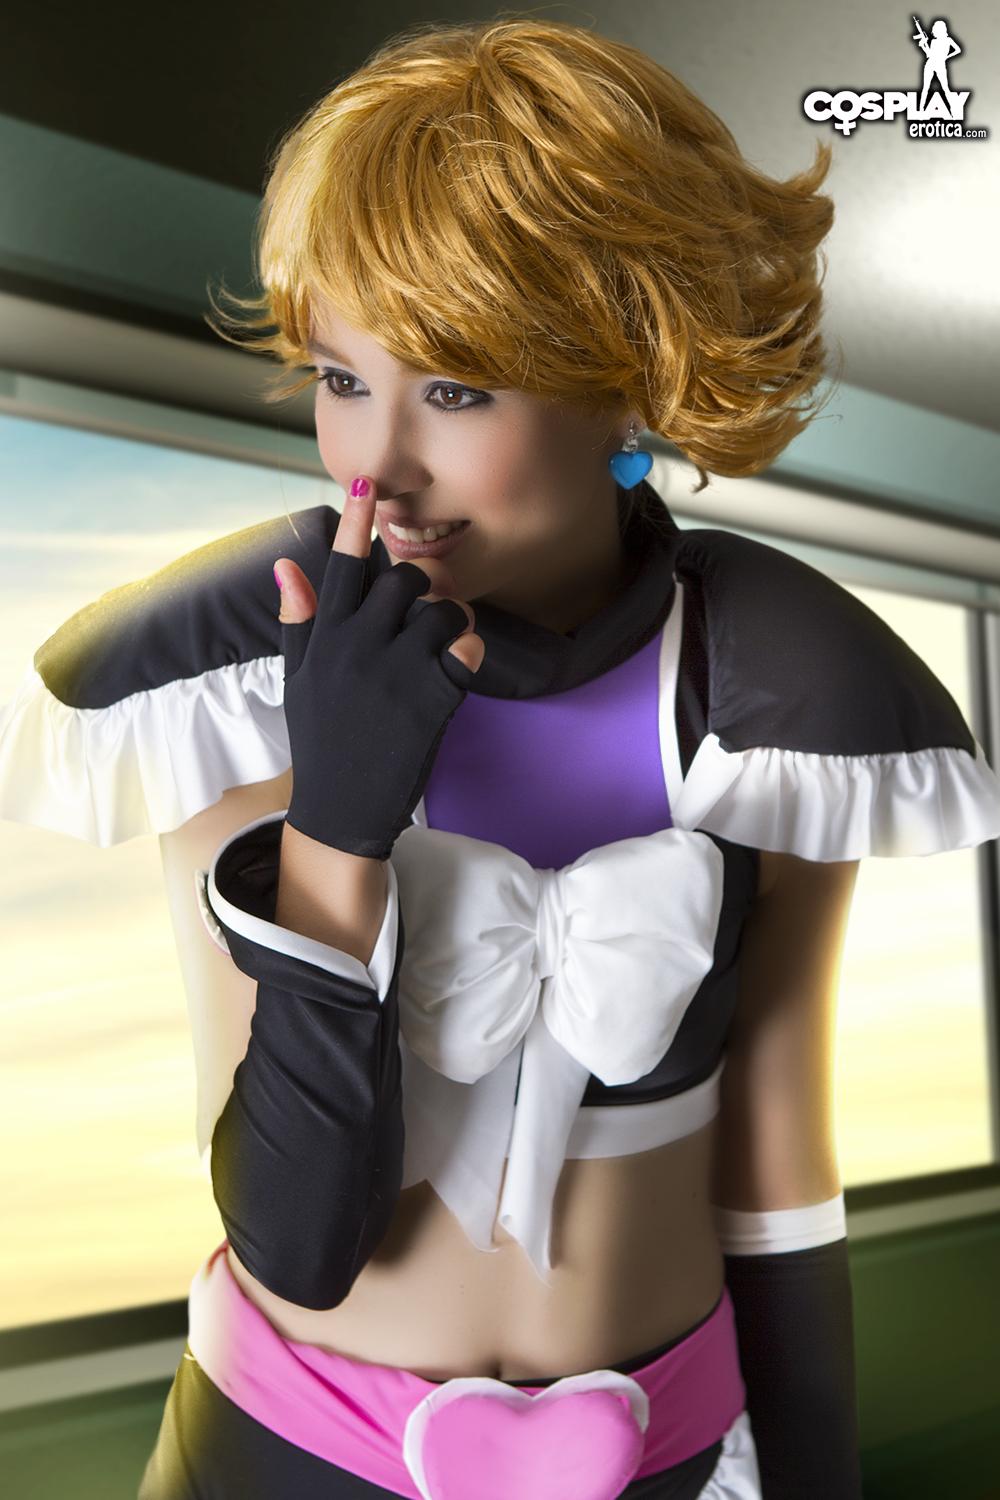 Cosplay hottie stacy strisce in un set anime sexy
 #60007690